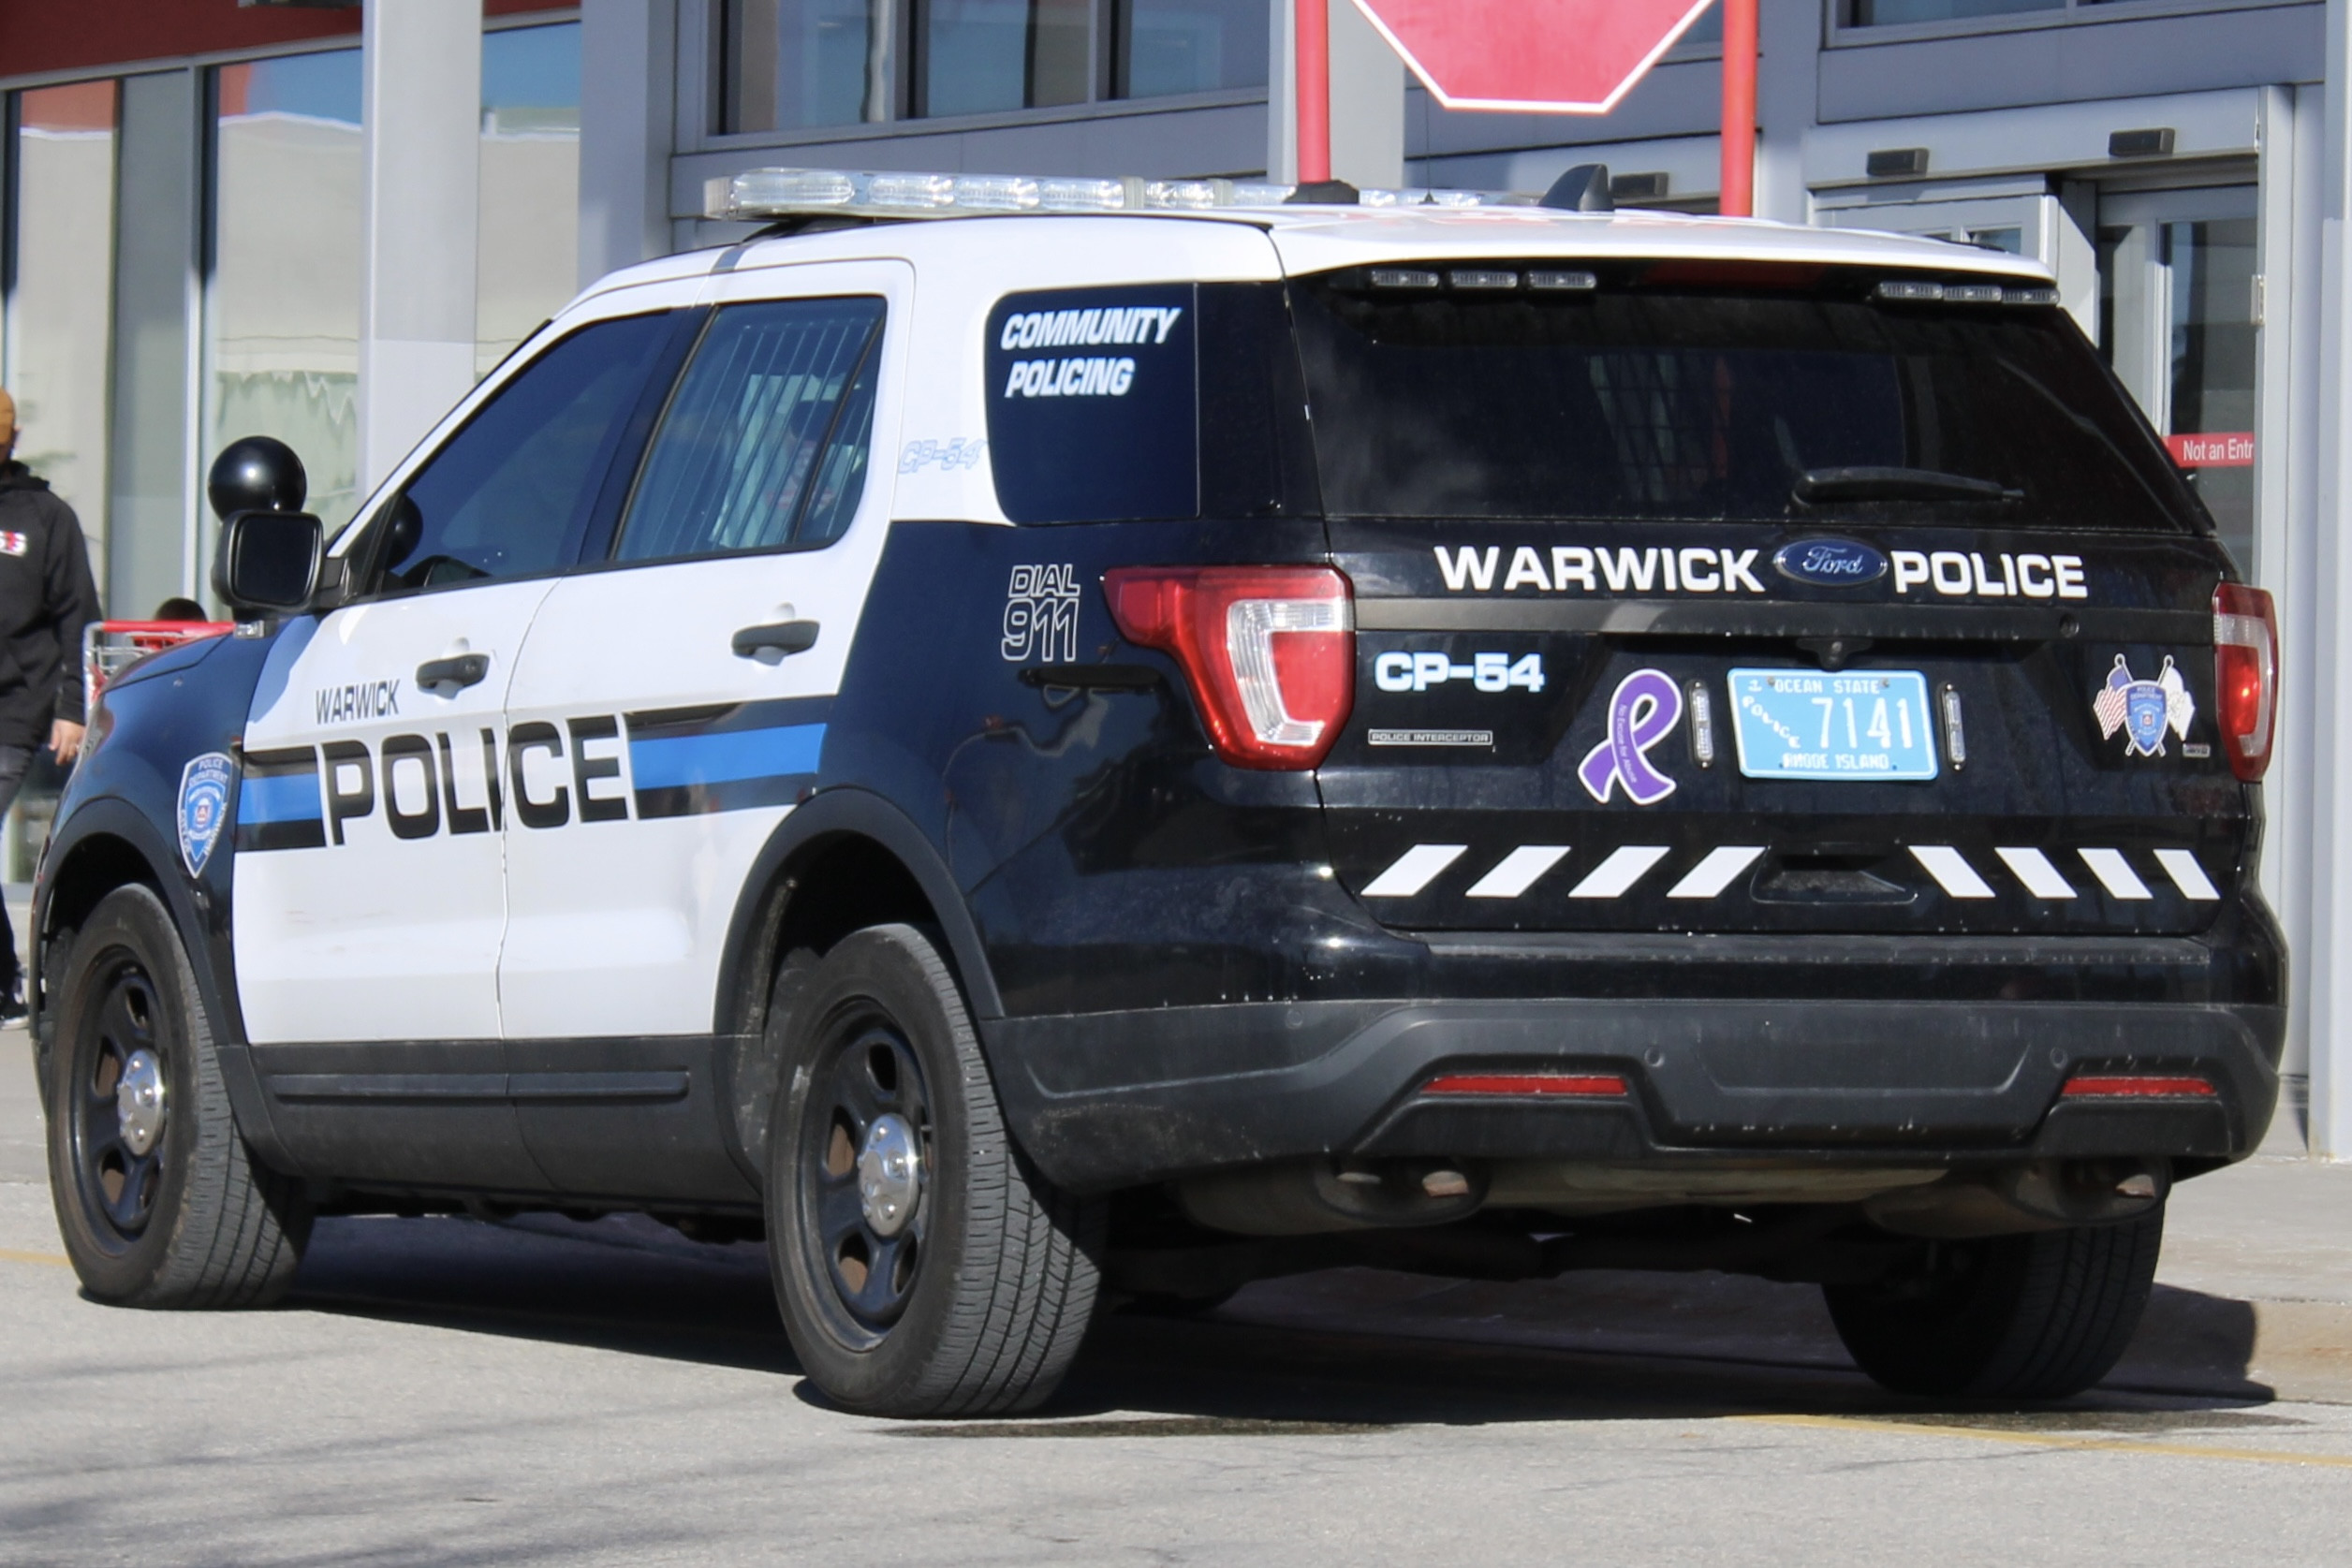 A photo  of Warwick Police
            Cruiser CP-54, a 2019 Ford Police Interceptor Utility             taken by @riemergencyvehicles